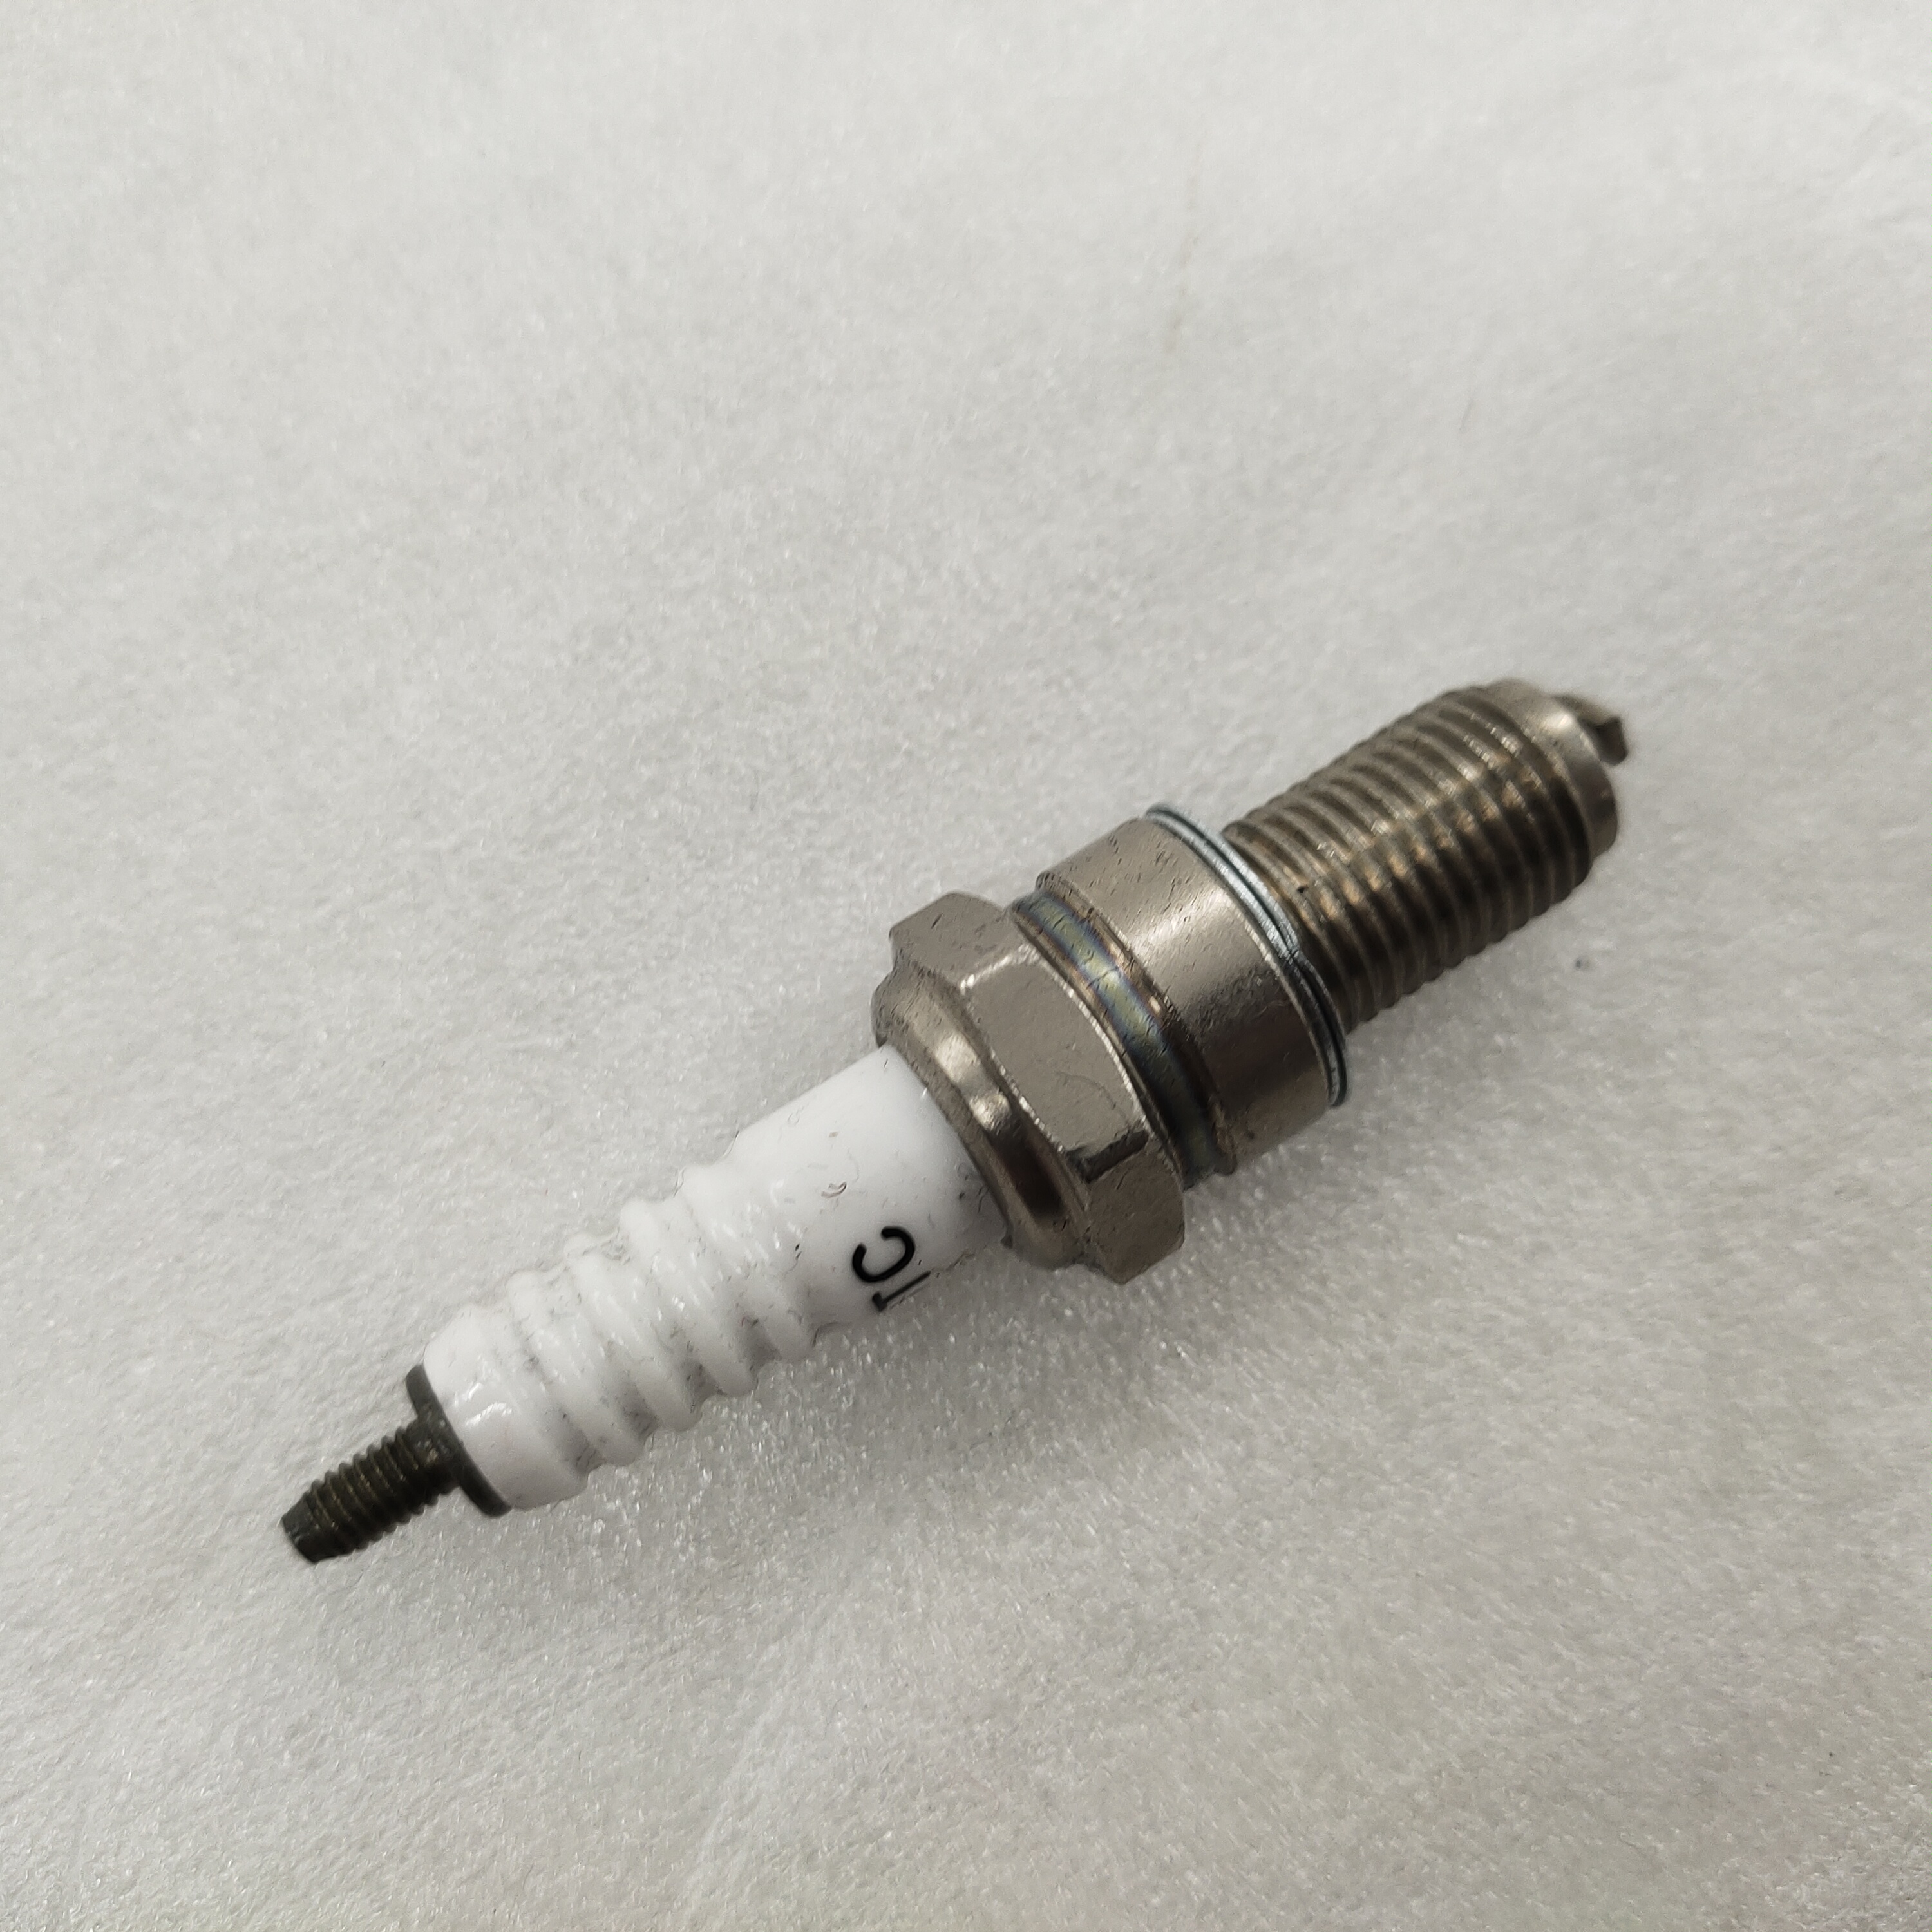 High quality Motorcycle spark plug suppliers CDI Box Ignition Spark plug Wholesale China Hot Sale high energy manufacturer